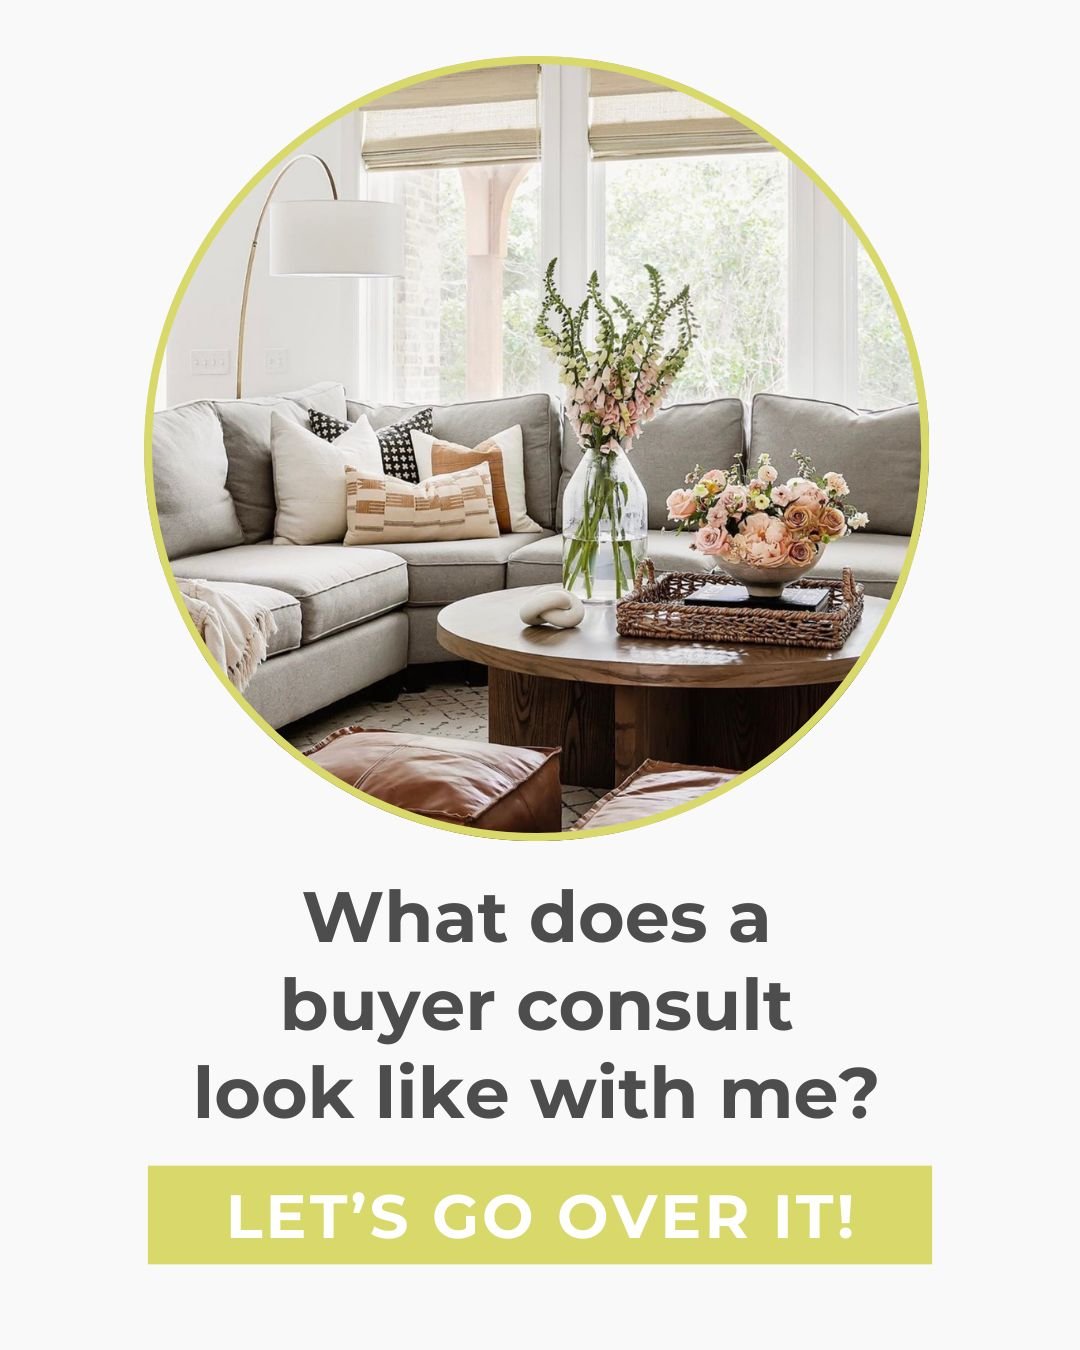 Ever wonder what ACTUALLY happens during a buyer consult?
Let&rsquo;s paint a picture of what a buyer consult entails. 

First, we meet in a place you feel comfortable in - this is all about you after all!

We&rsquo;ll go over the financial side of b